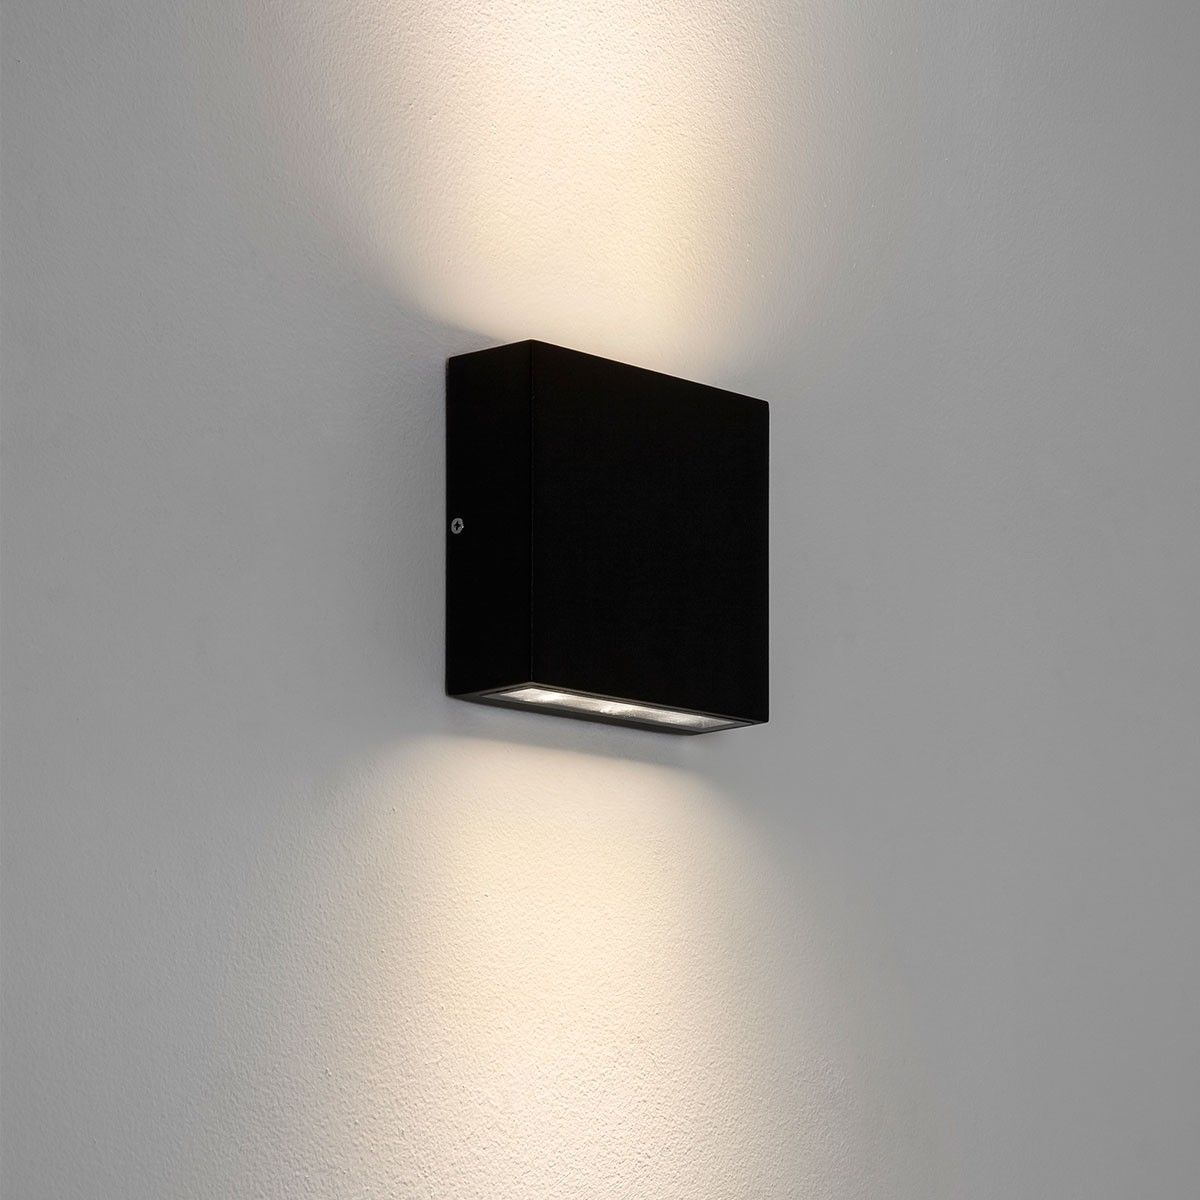 Astro Elis Twin Black Outdoor Led Wall Light At Uk Electrical Supplies. With Regard To Black Outdoor Wall Lighting (Photo 10 of 15)